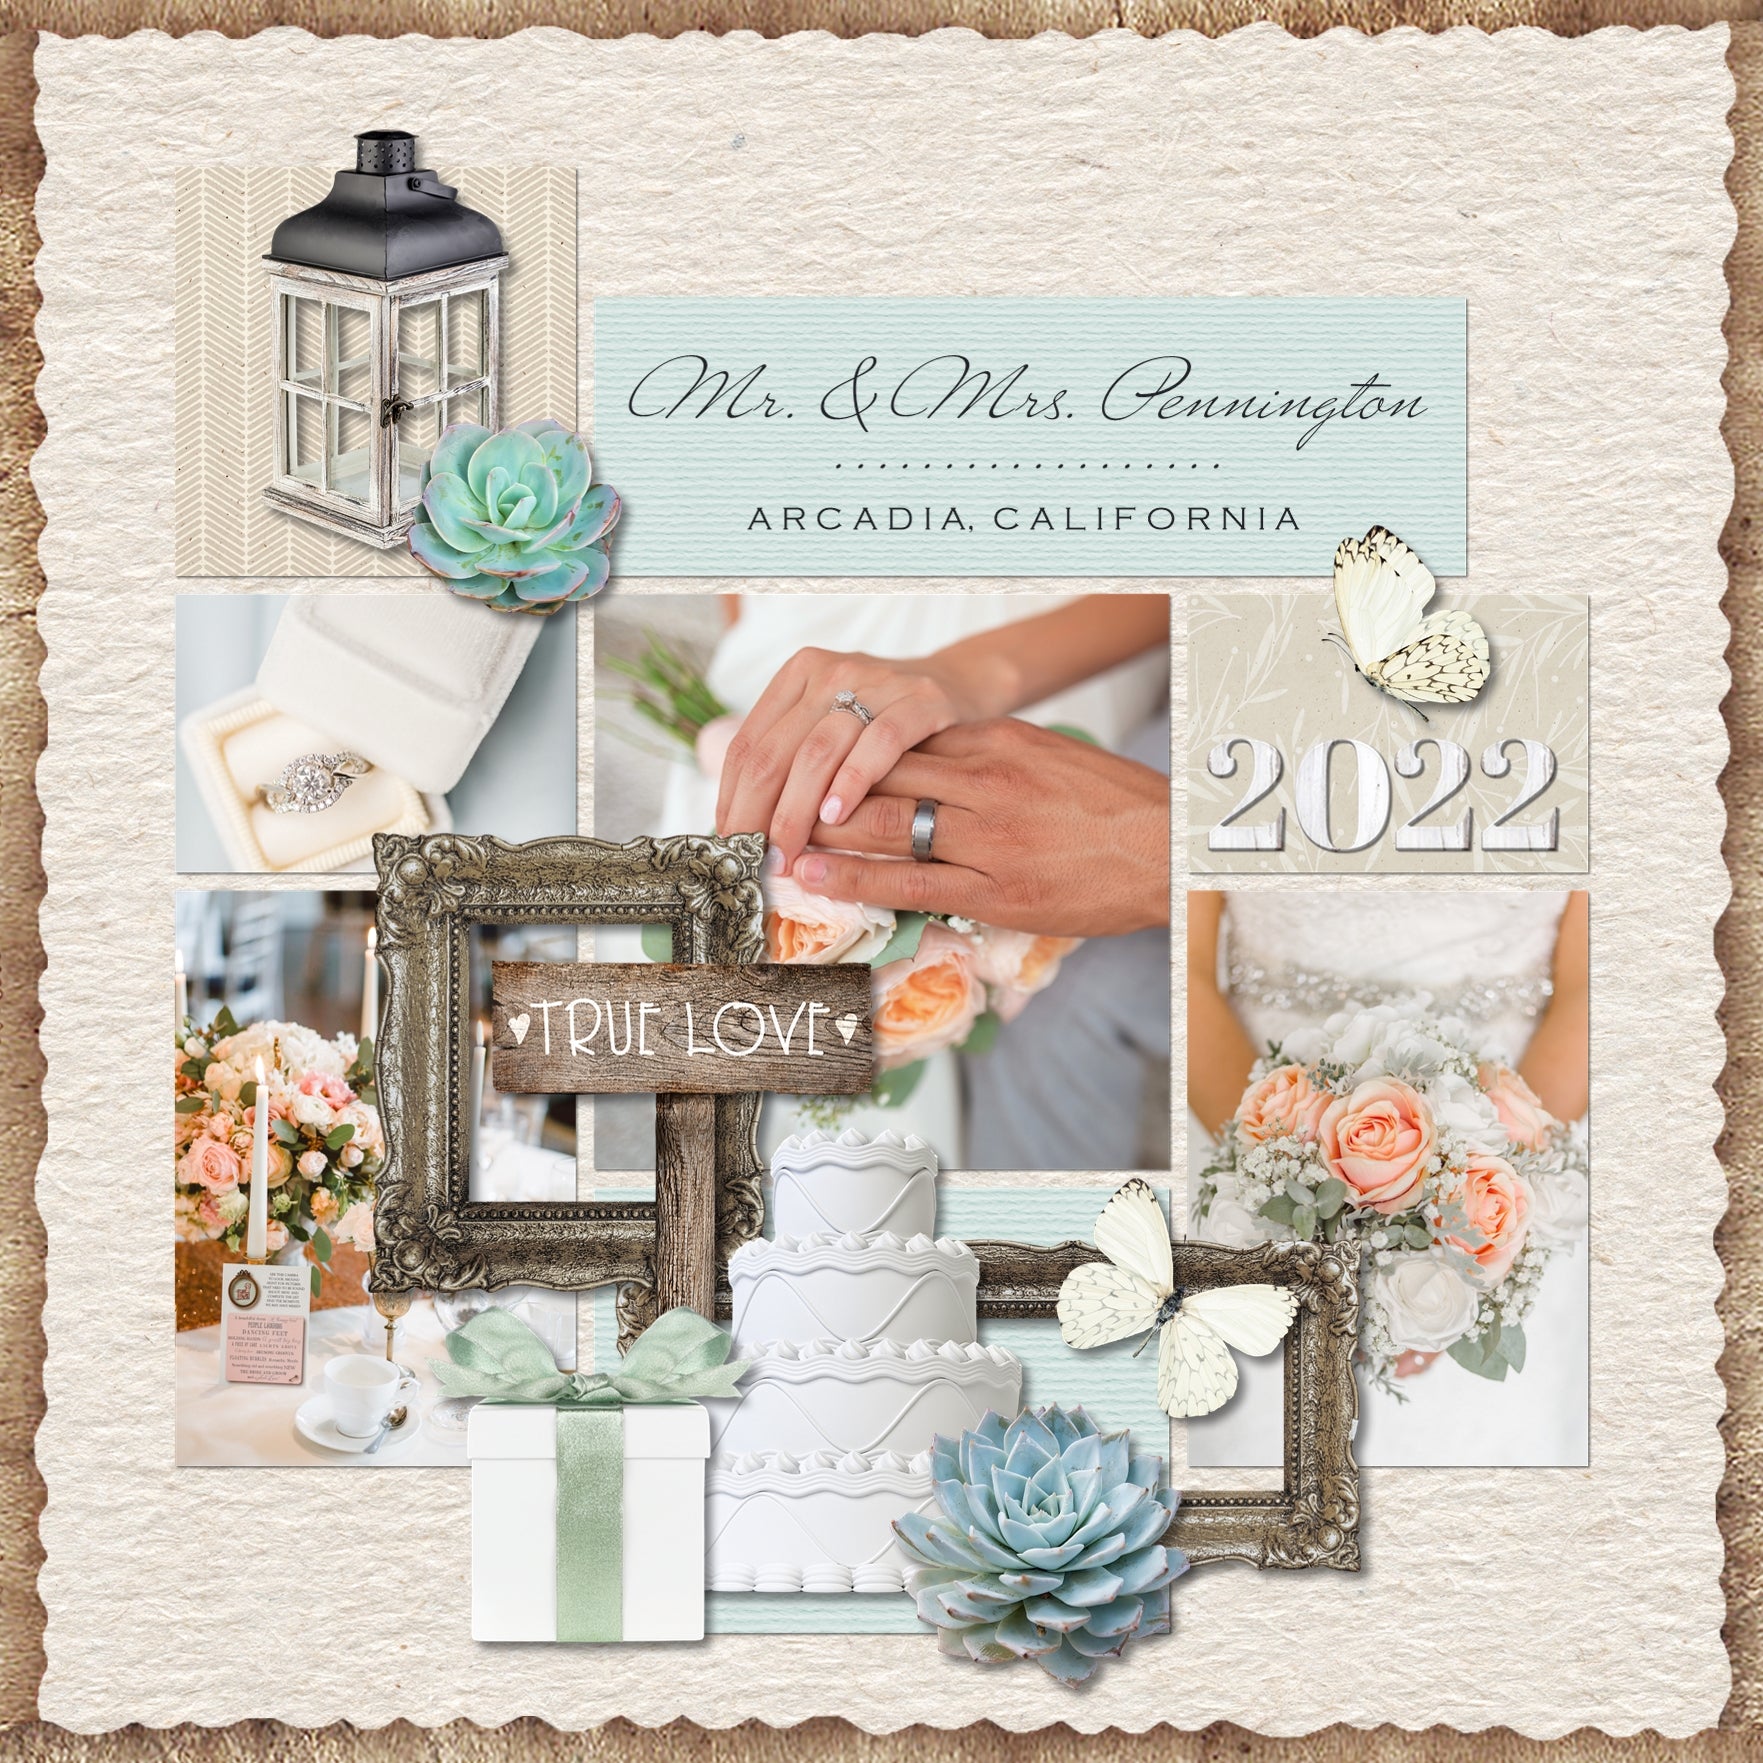 With the perfect touch of farmhouse and shabby chic, this paper and embellishments digital art kit by Lucky Girl Creative is perfect for any outdoor wedding and lots of everyday moments filled with love, too.